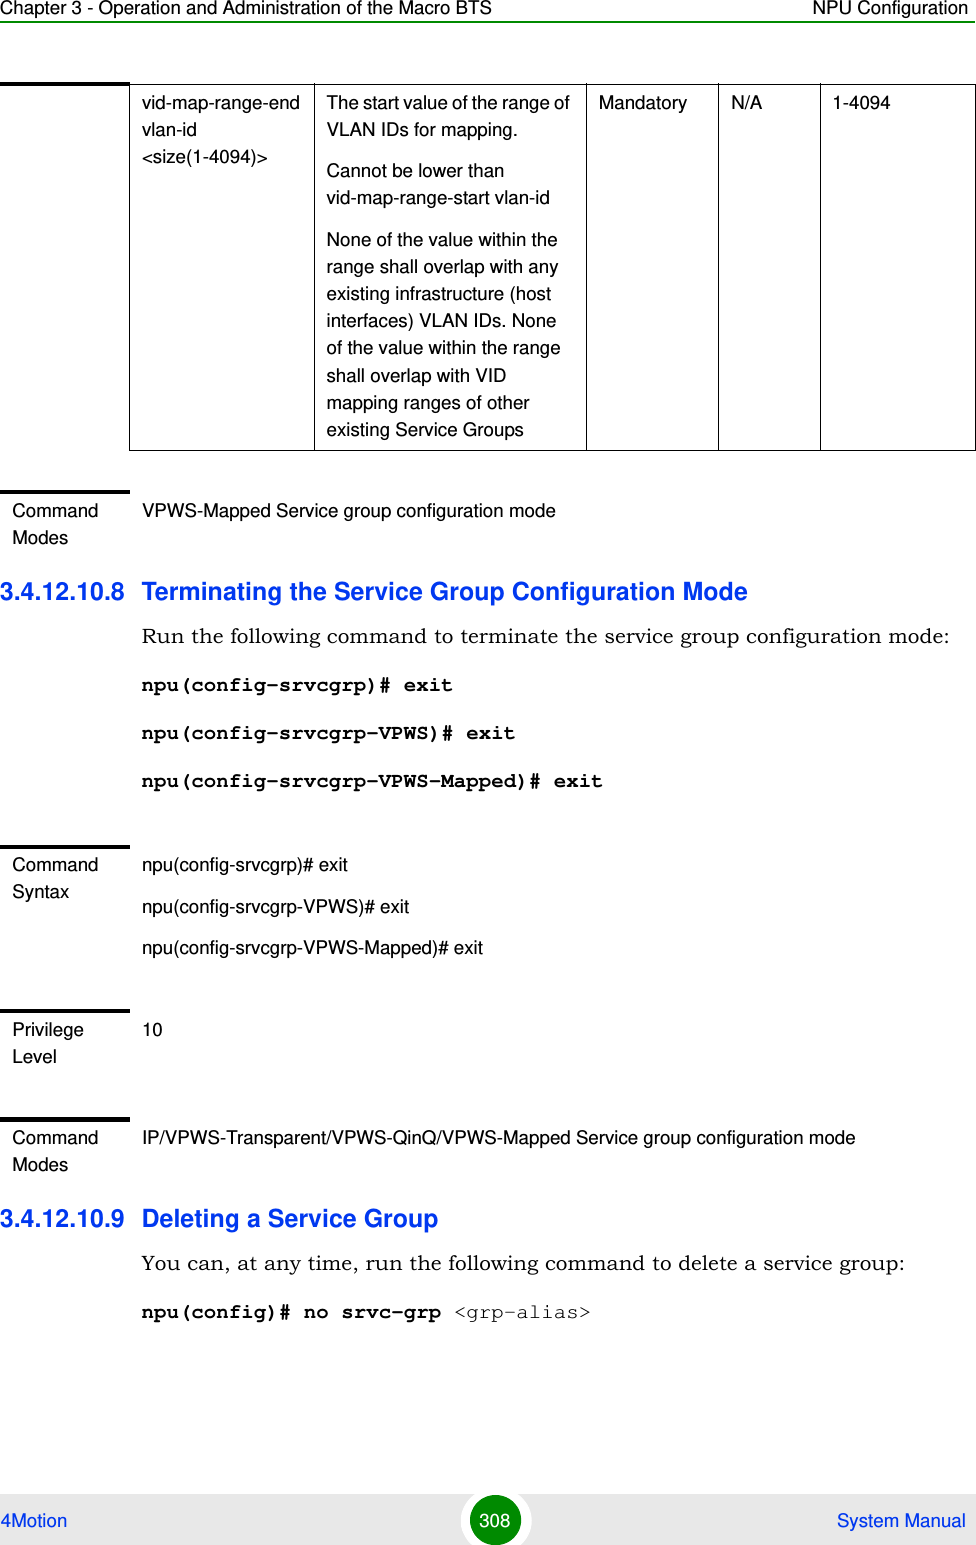 Chapter 3 - Operation and Administration of the Macro BTS NPU Configuration4Motion 308  System Manual3.4.12.10.8 Terminating the Service Group Configuration ModeRun the following command to terminate the service group configuration mode:npu(config-srvcgrp)# exitnpu(config-srvcgrp-VPWS)# exitnpu(config-srvcgrp-VPWS-Mapped)# exit3.4.12.10.9 Deleting a Service GroupYou can, at any time, run the following command to delete a service group:npu(config)# no srvc-grp &lt;grp-alias&gt;vid-map-range-end vlan-id &lt;size(1-4094)&gt;The start value of the range of VLAN IDs for mapping.Cannot be lower than vid-map-range-start vlan-id None of the value within the range shall overlap with any existing infrastructure (host interfaces) VLAN IDs. None of the value within the range shall overlap with VID mapping ranges of other existing Service GroupsMandatory N/A 1-4094Command ModesVPWS-Mapped Service group configuration modeCommand Syntaxnpu(config-srvcgrp)# exitnpu(config-srvcgrp-VPWS)# exitnpu(config-srvcgrp-VPWS-Mapped)# exitPrivilege Level10Command ModesIP/VPWS-Transparent/VPWS-QinQ/VPWS-Mapped Service group configuration mode